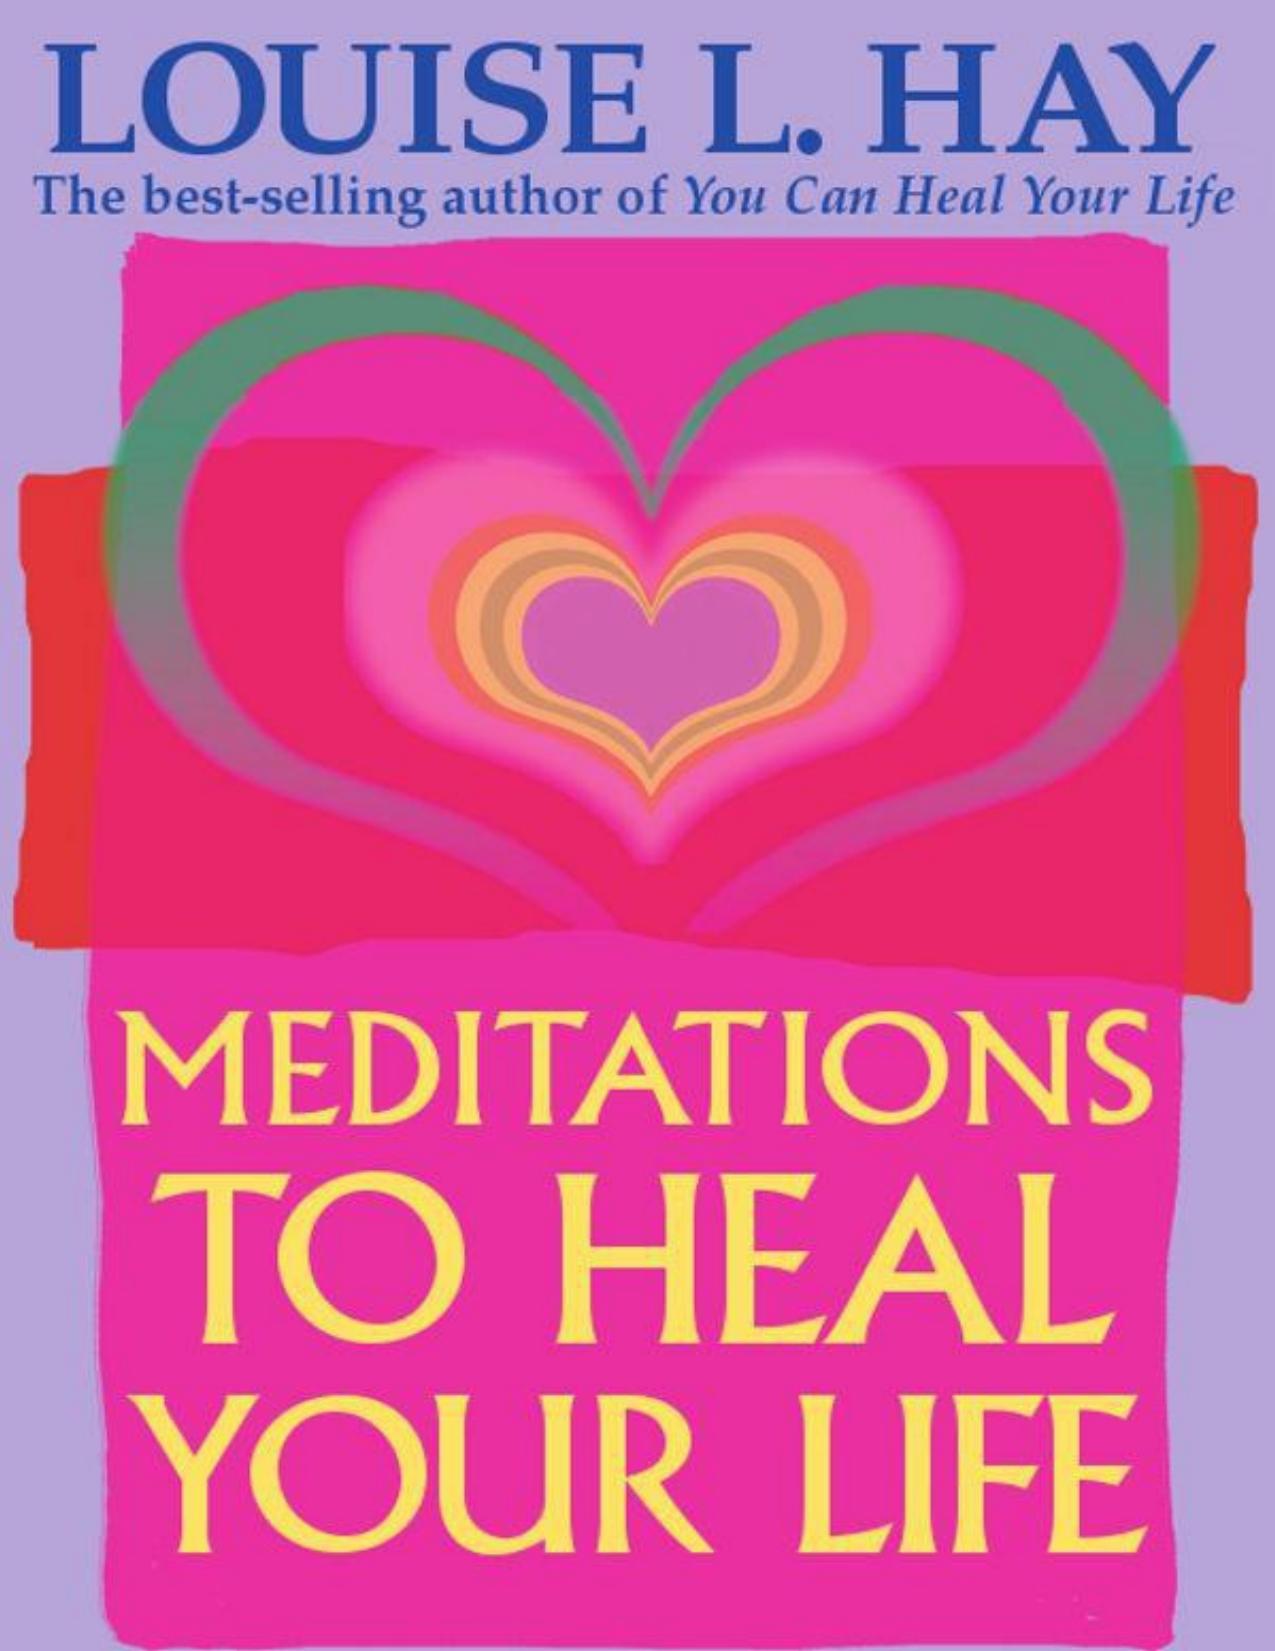 Meditations to Heal Your Life by Louise Hay